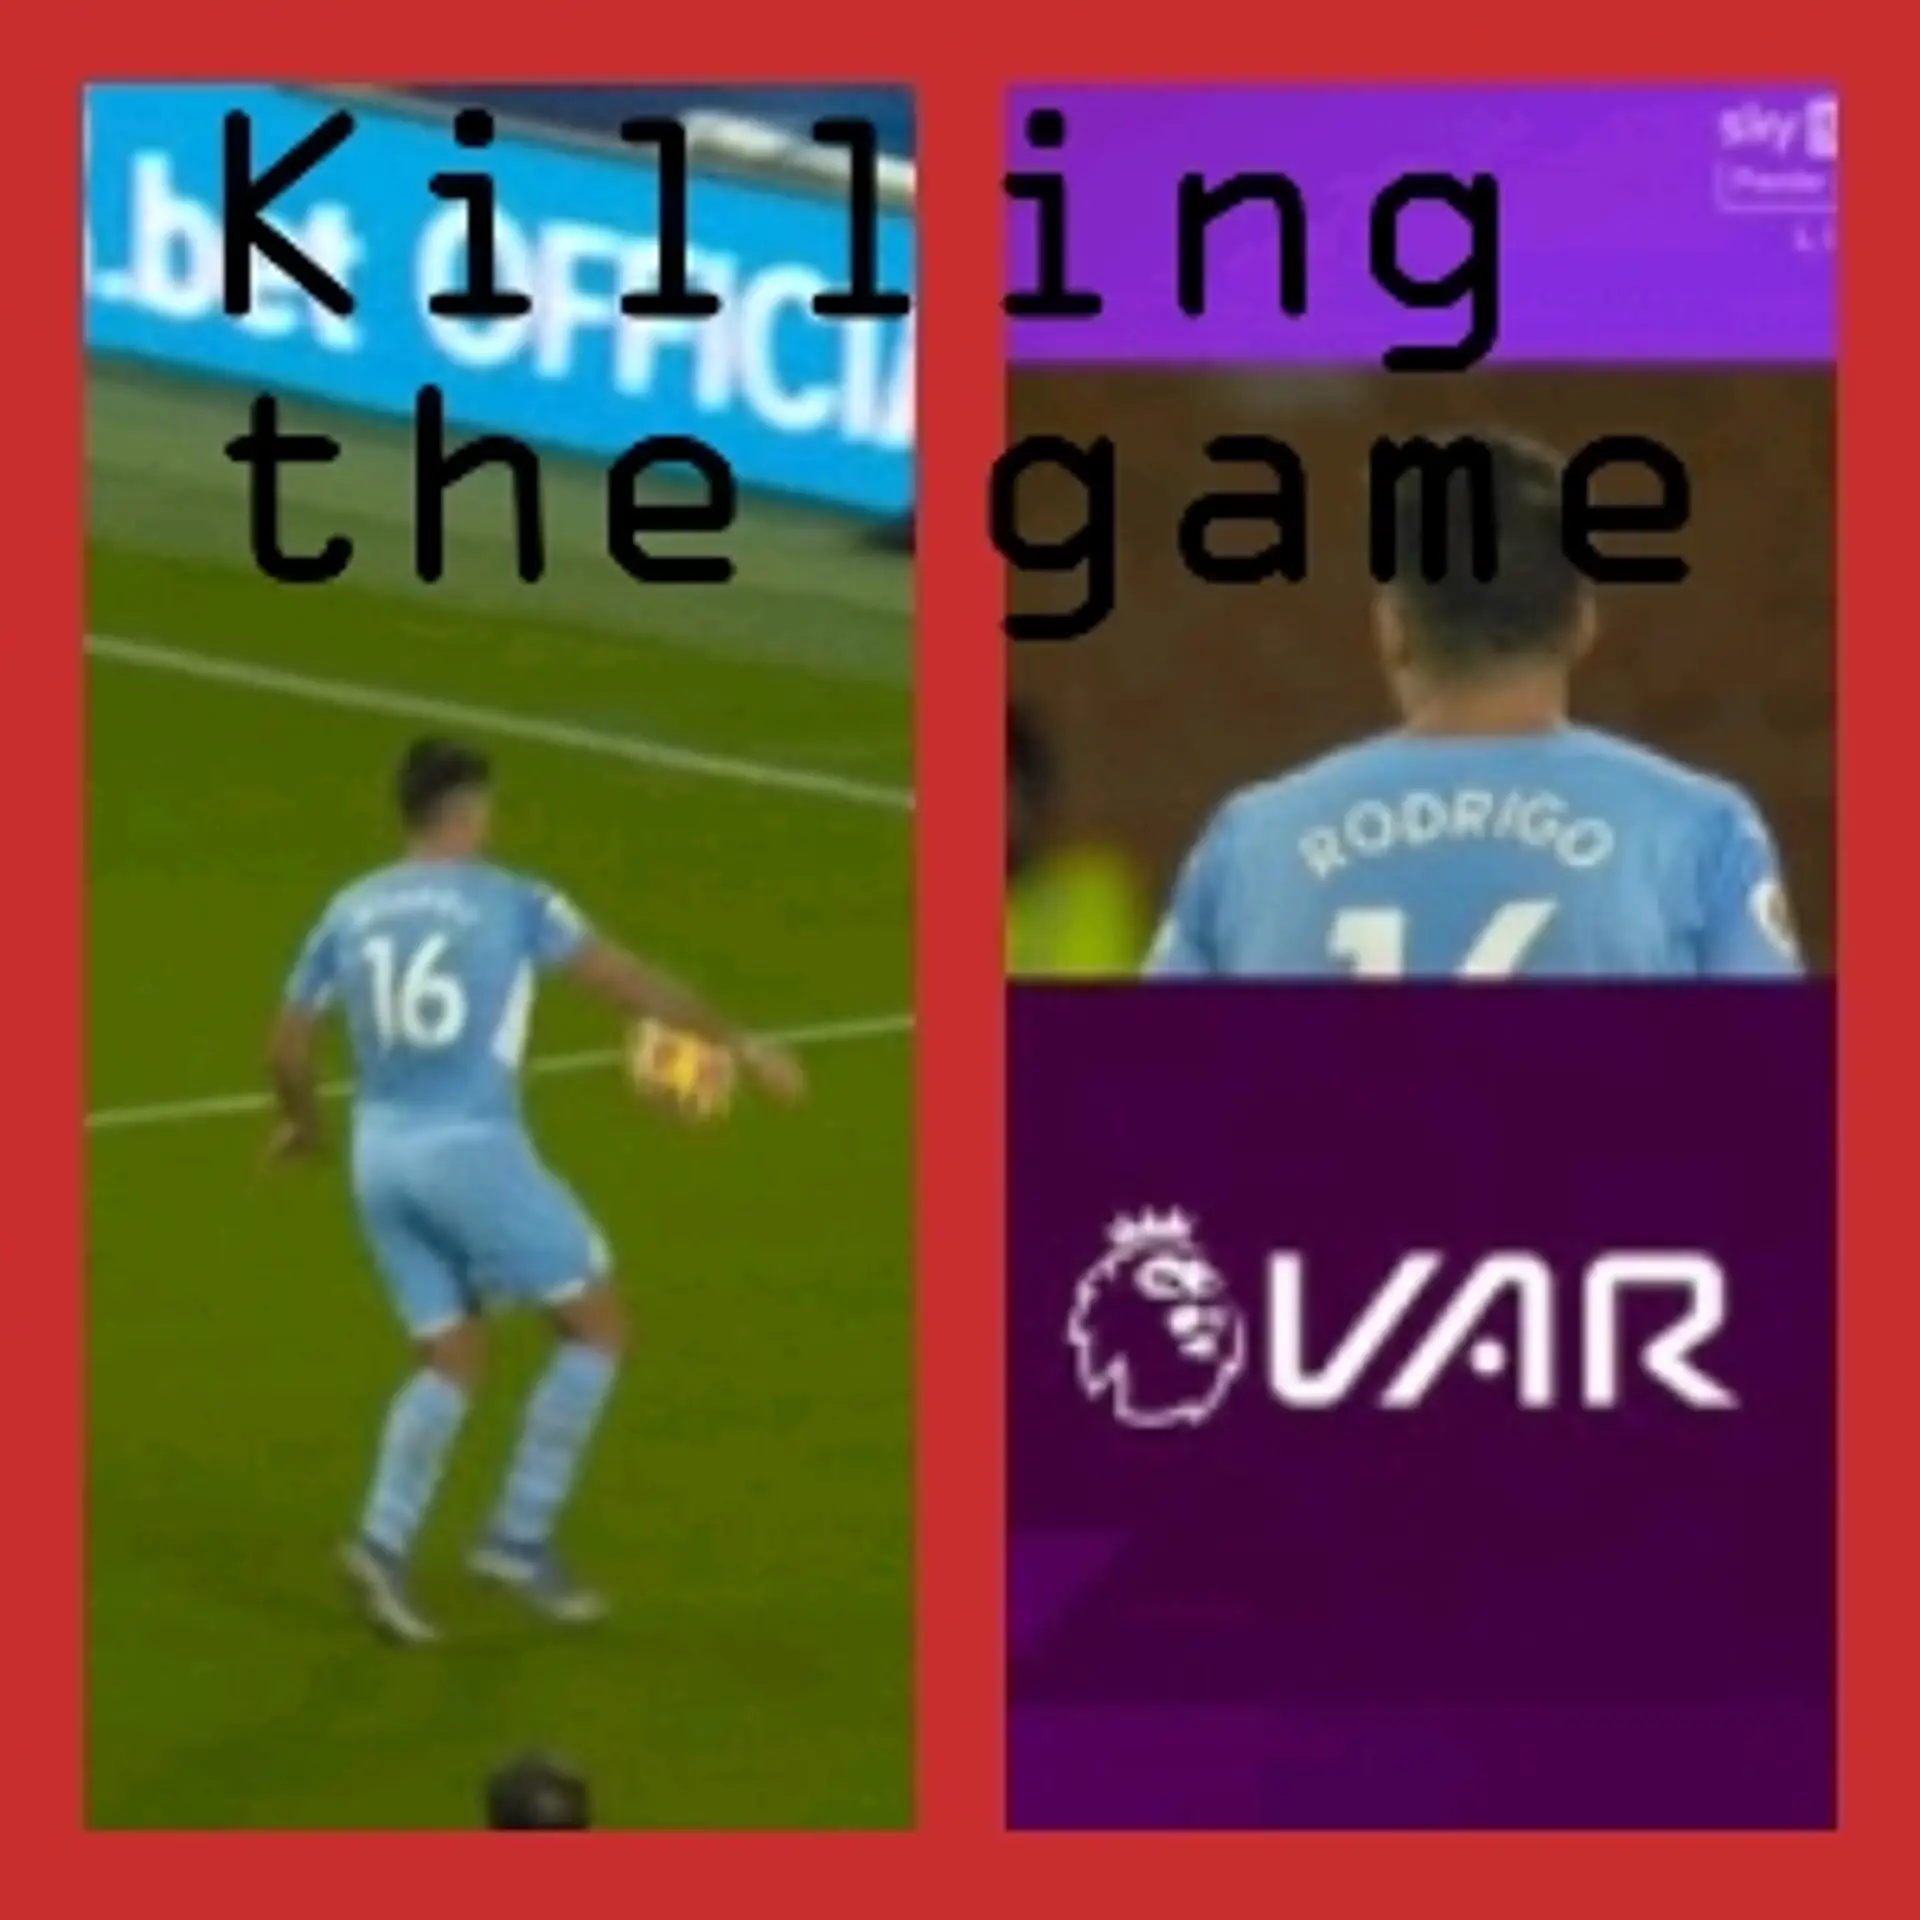 Who is killing the game; REF or VAR??